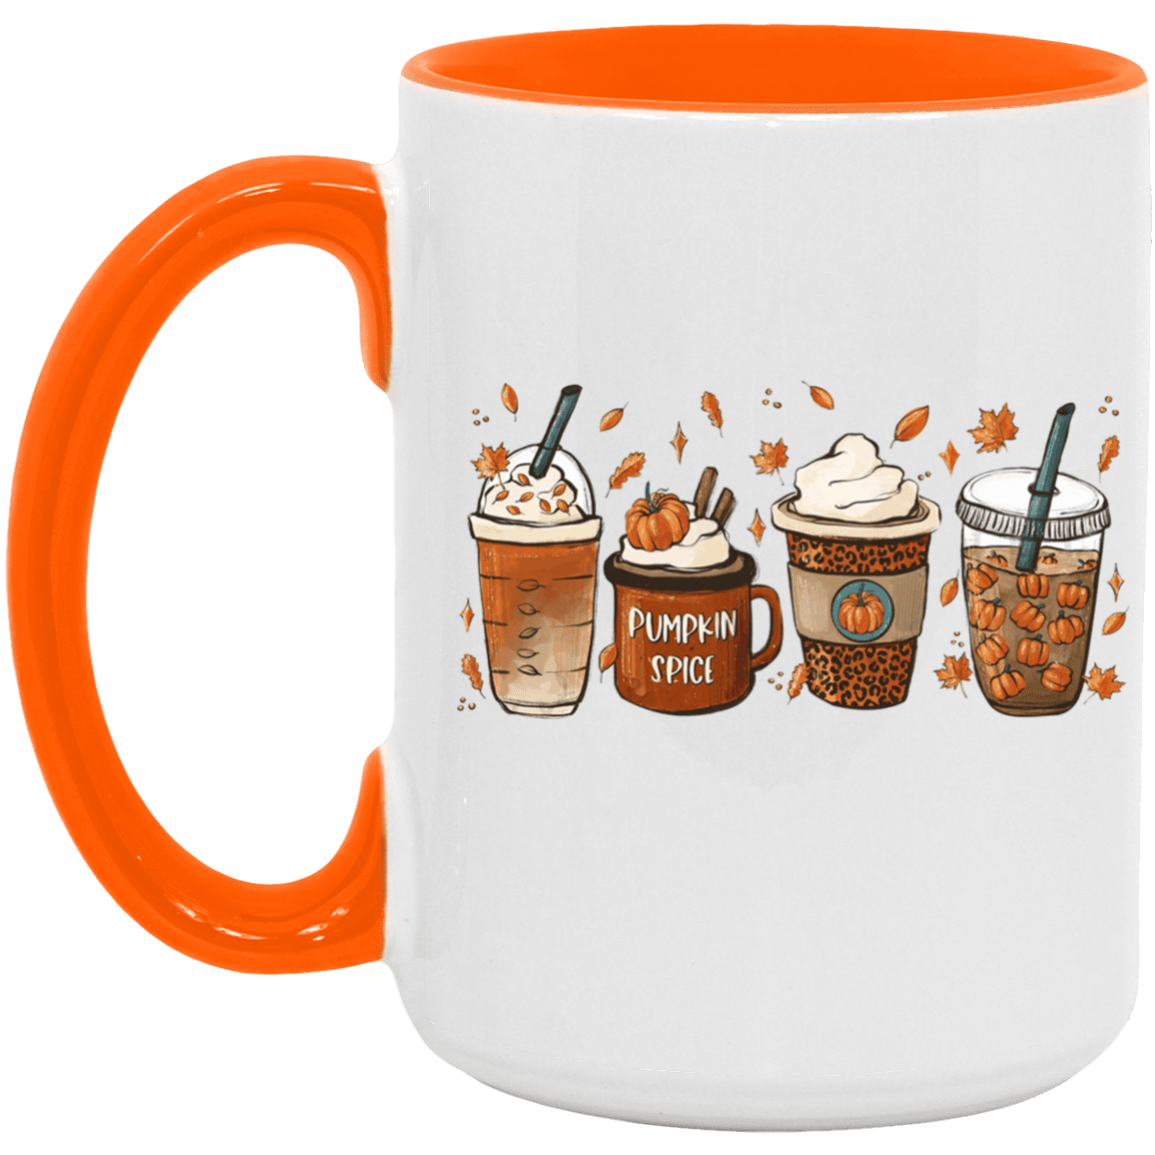 Pumpkin Spice and Latte Coffee Cup